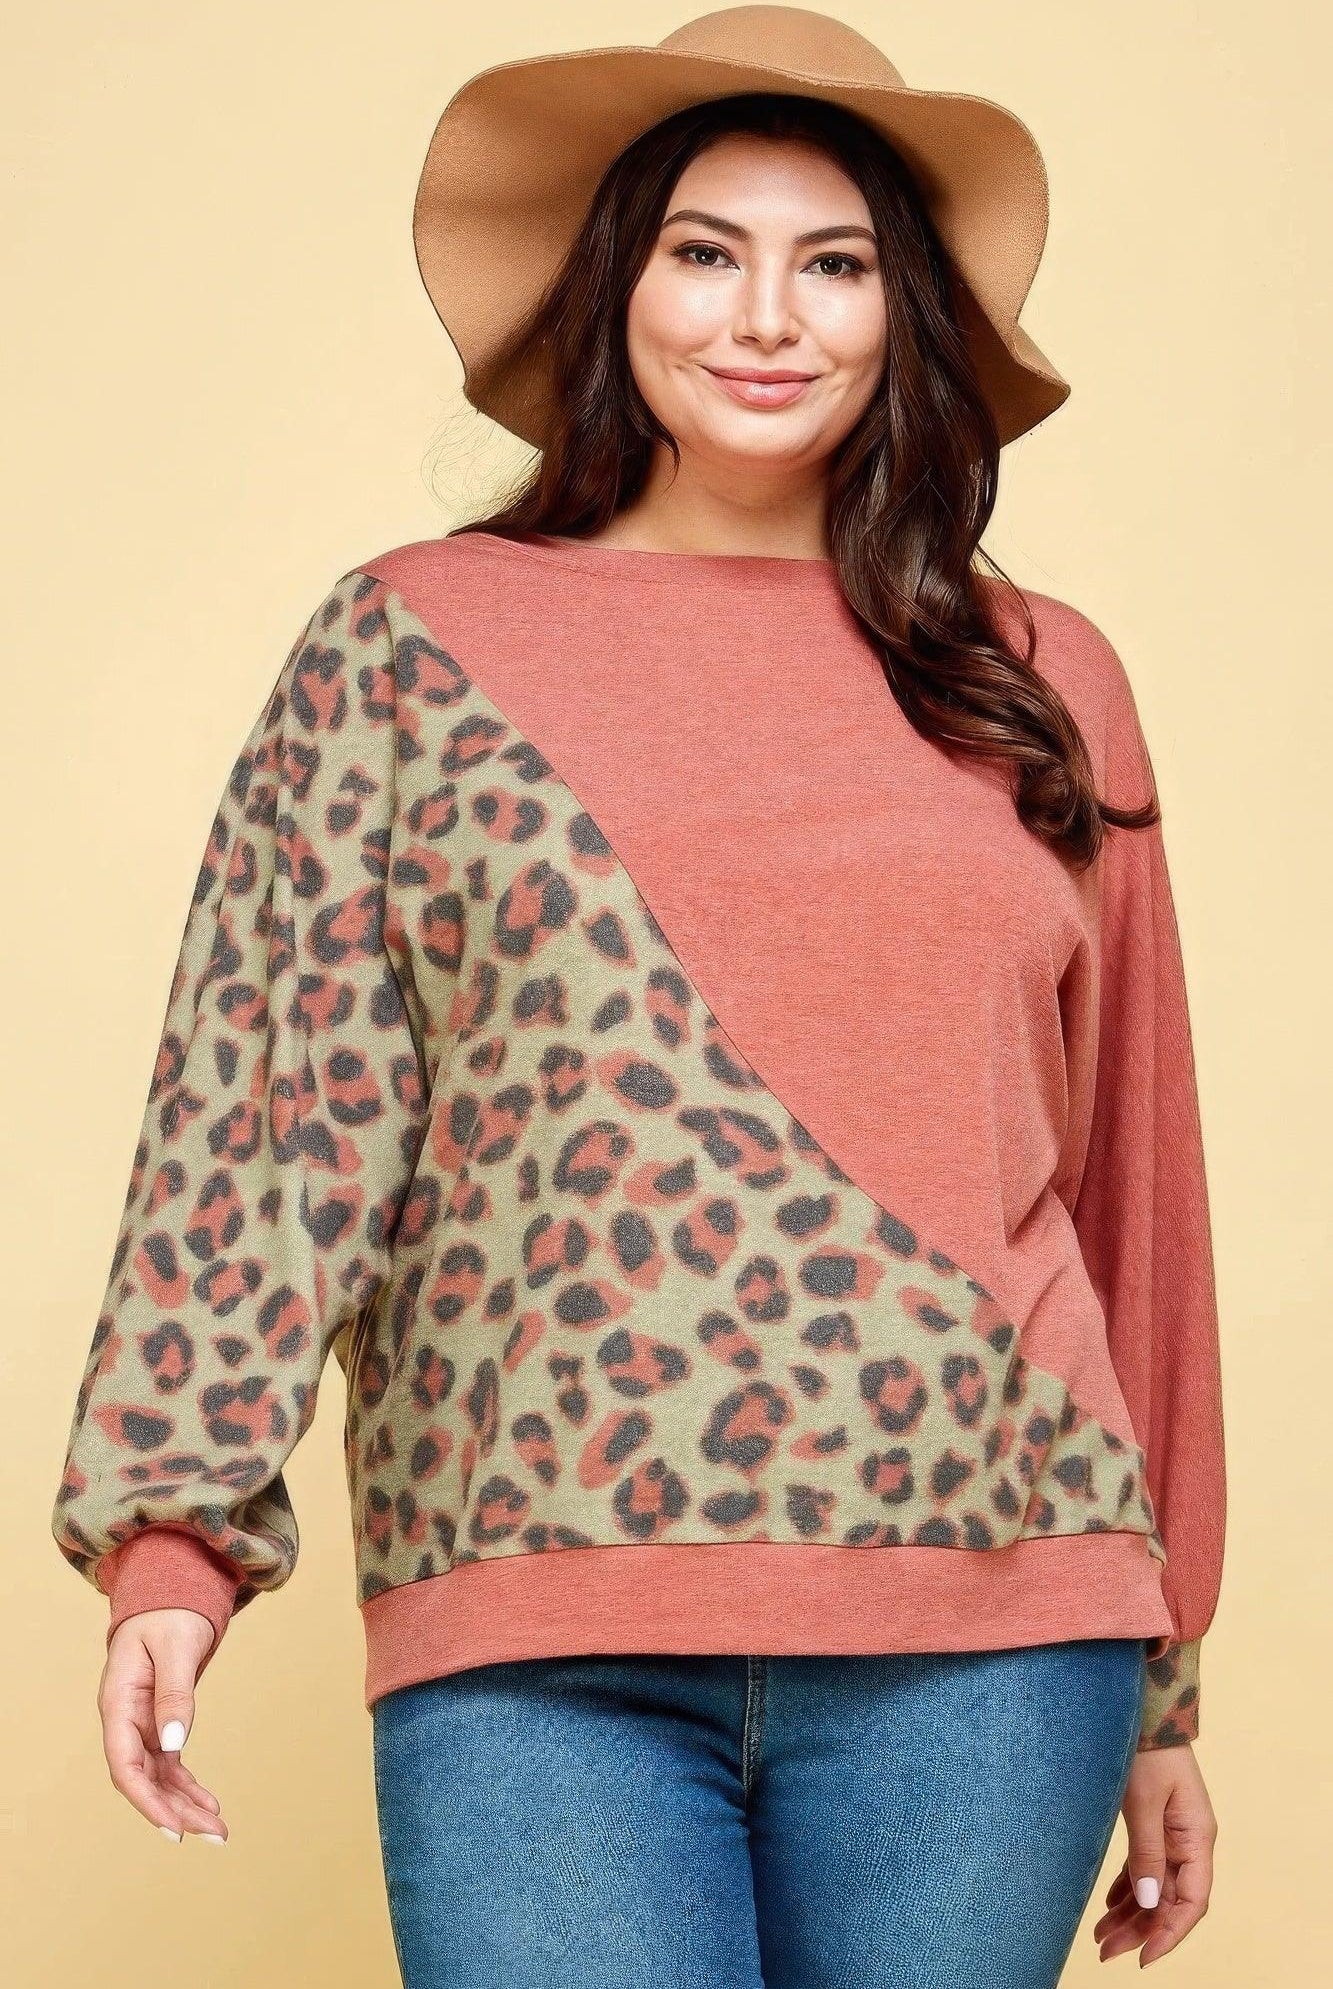 Women's Shirts Plus Size Cute Animal French Terry Brush Contrast Print Pullover